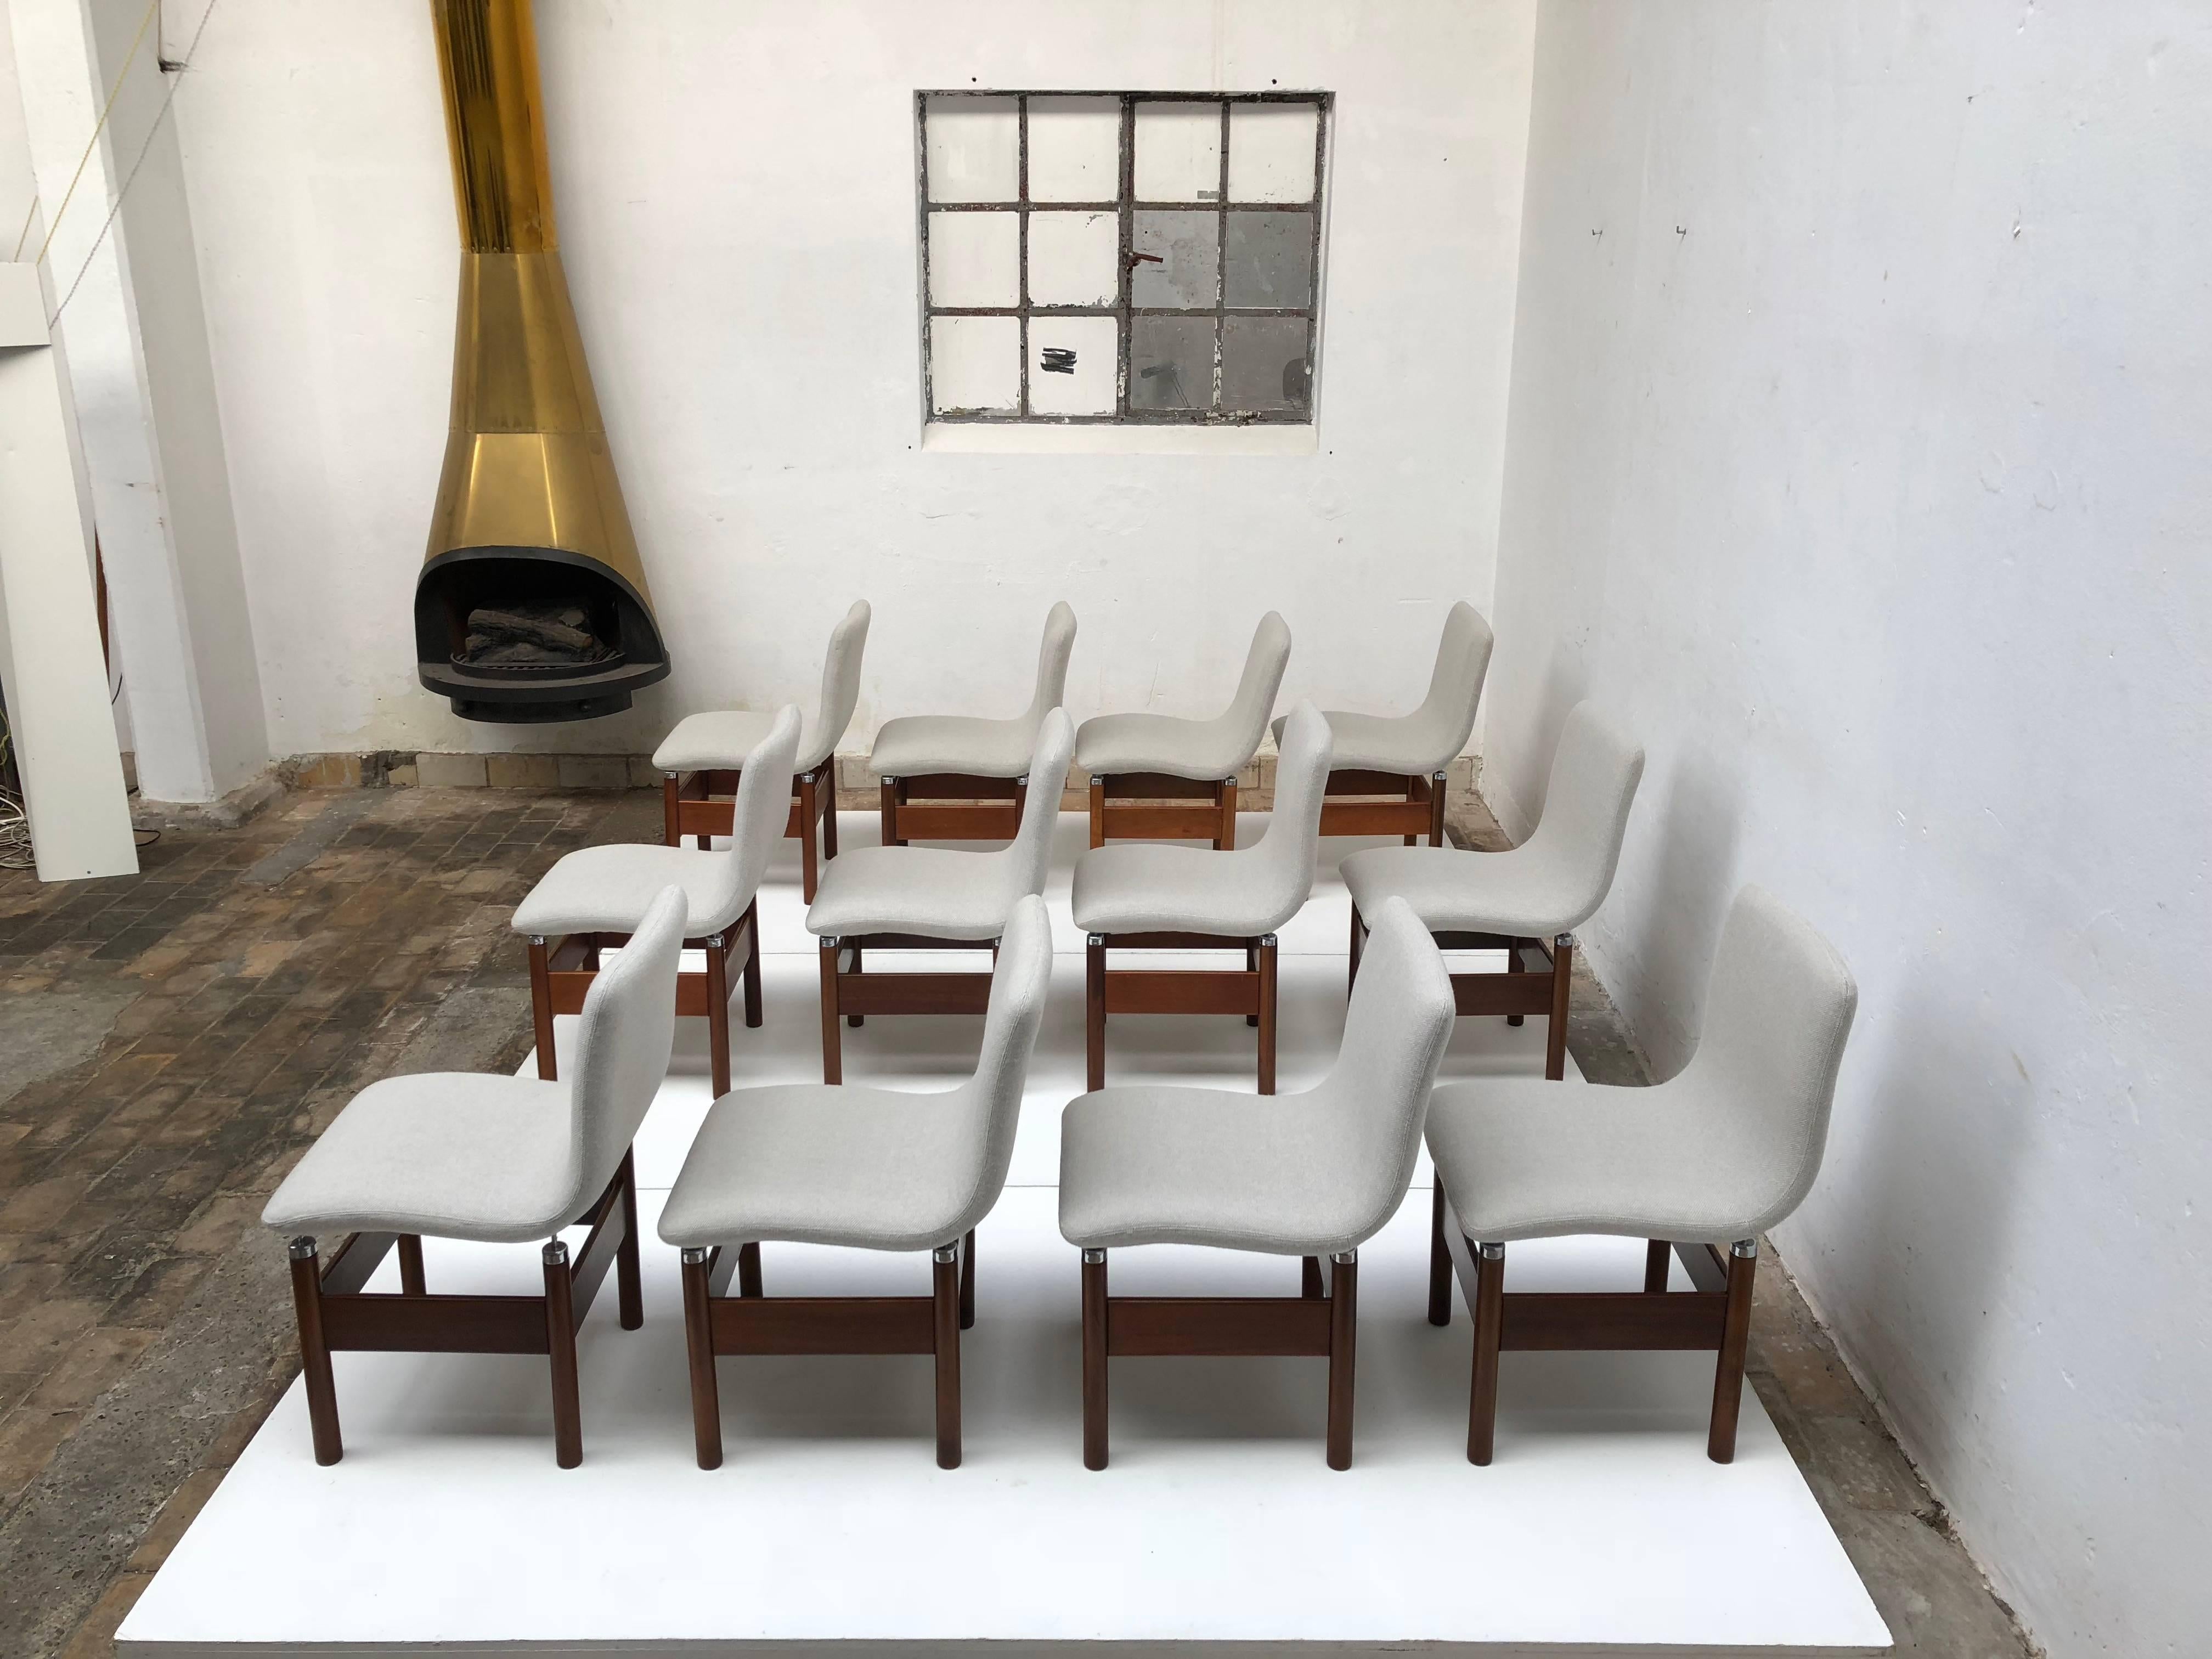 12 'Chelsea' Dining Chairs by Introini, Saporiti 1966, Upholstery Fully Restored In Good Condition For Sale In bergen op zoom, NL